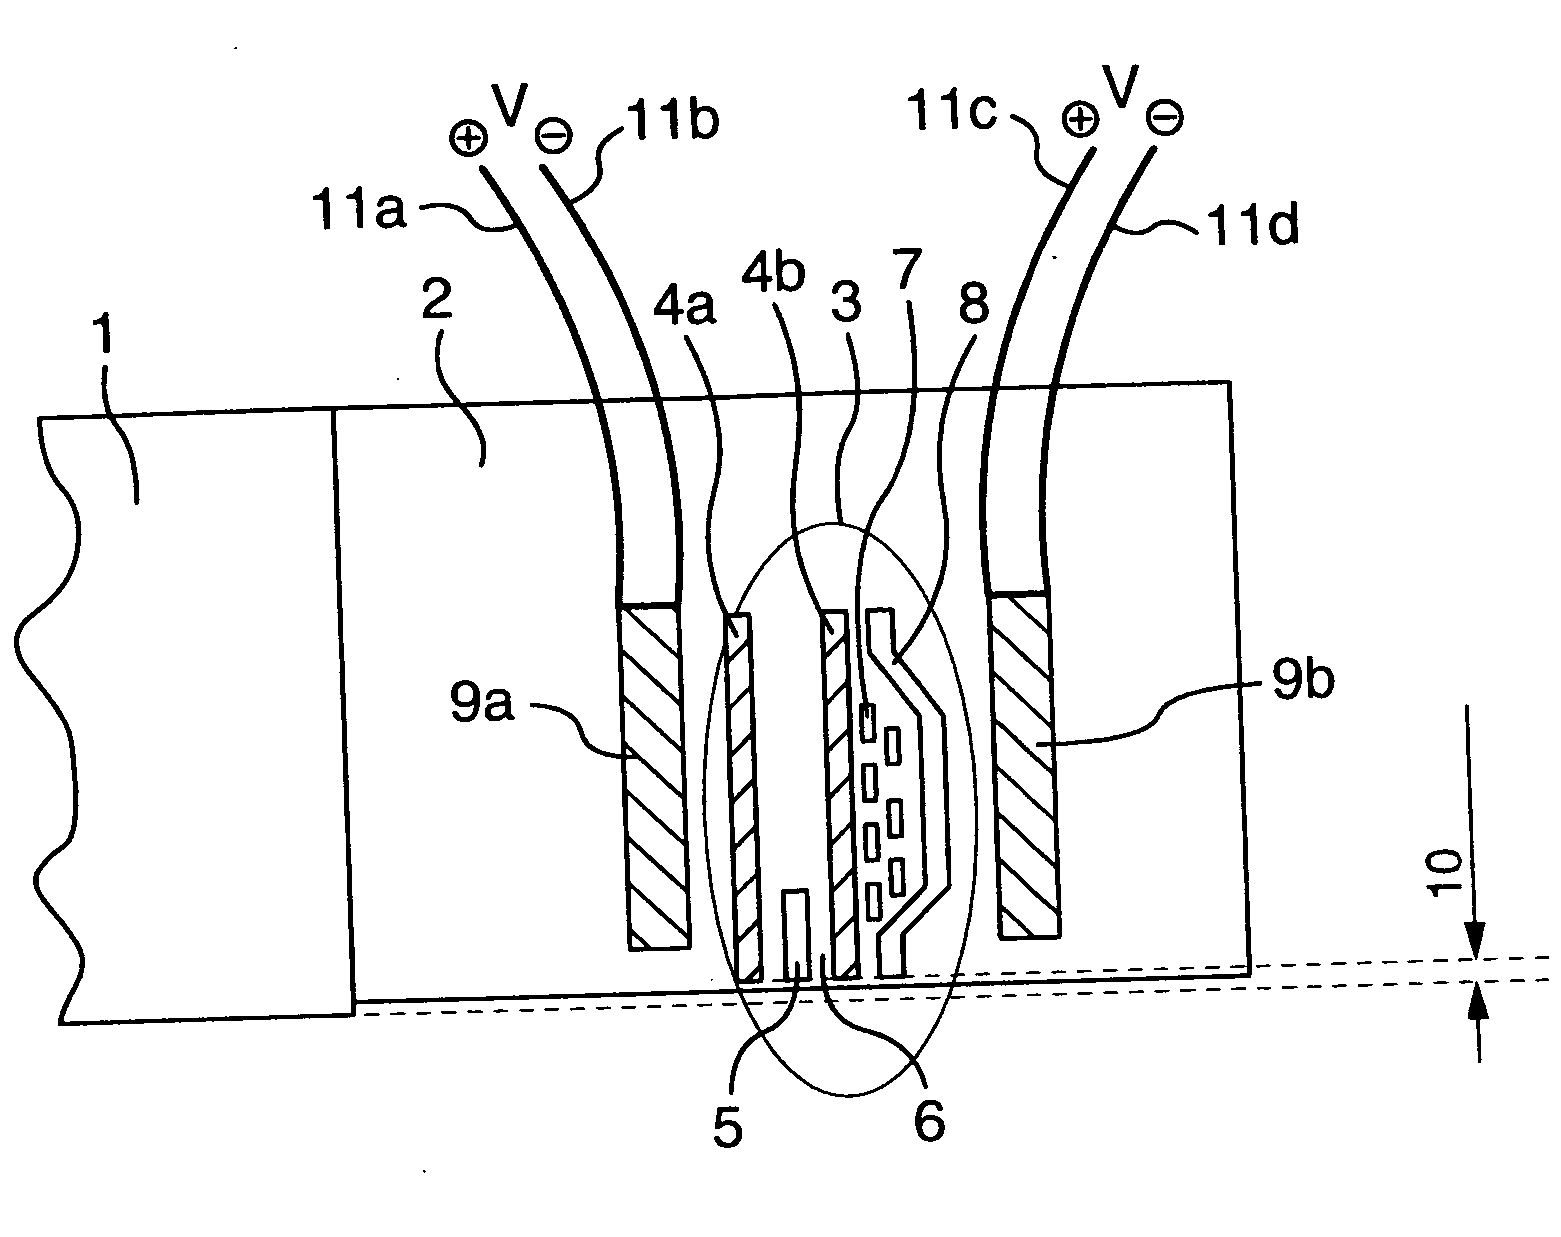 Magnetic head heating element in a disk drive